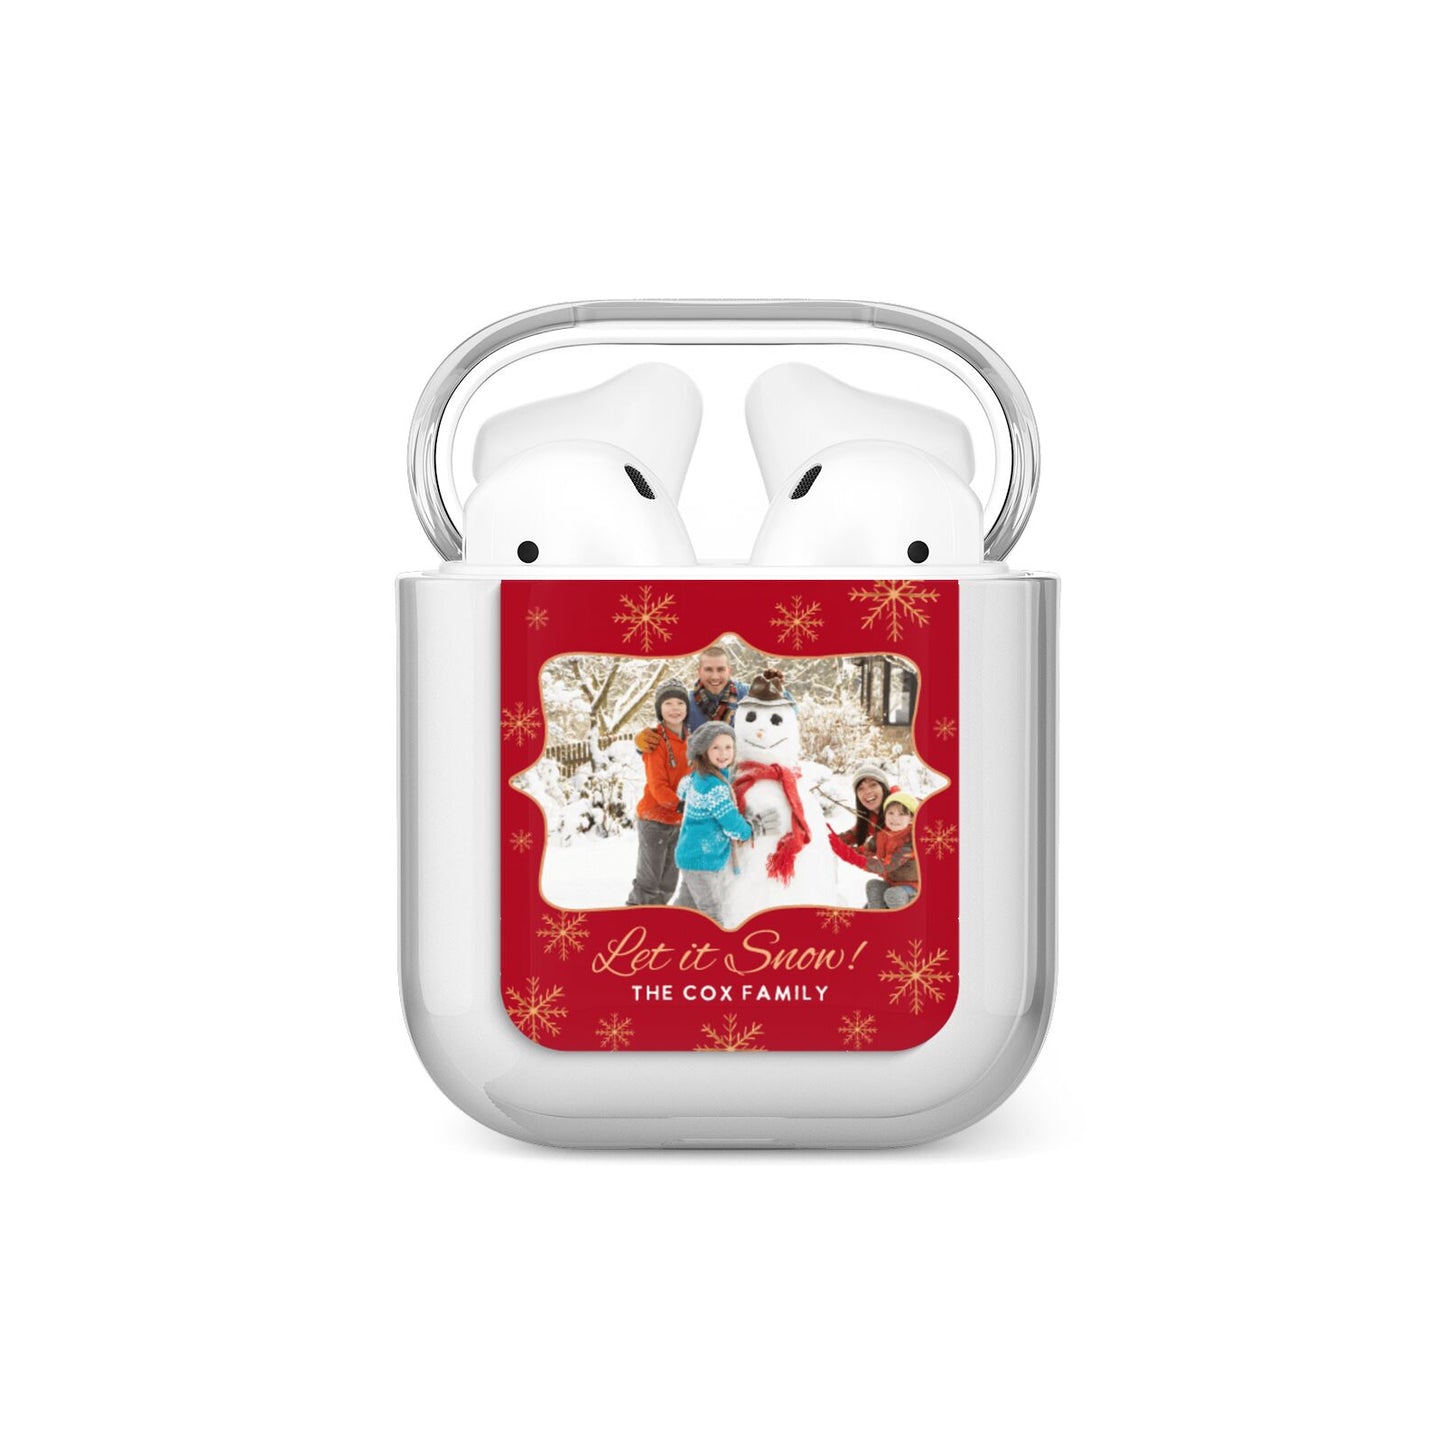 Let it Snow Christmas Photo Upload AirPods Case